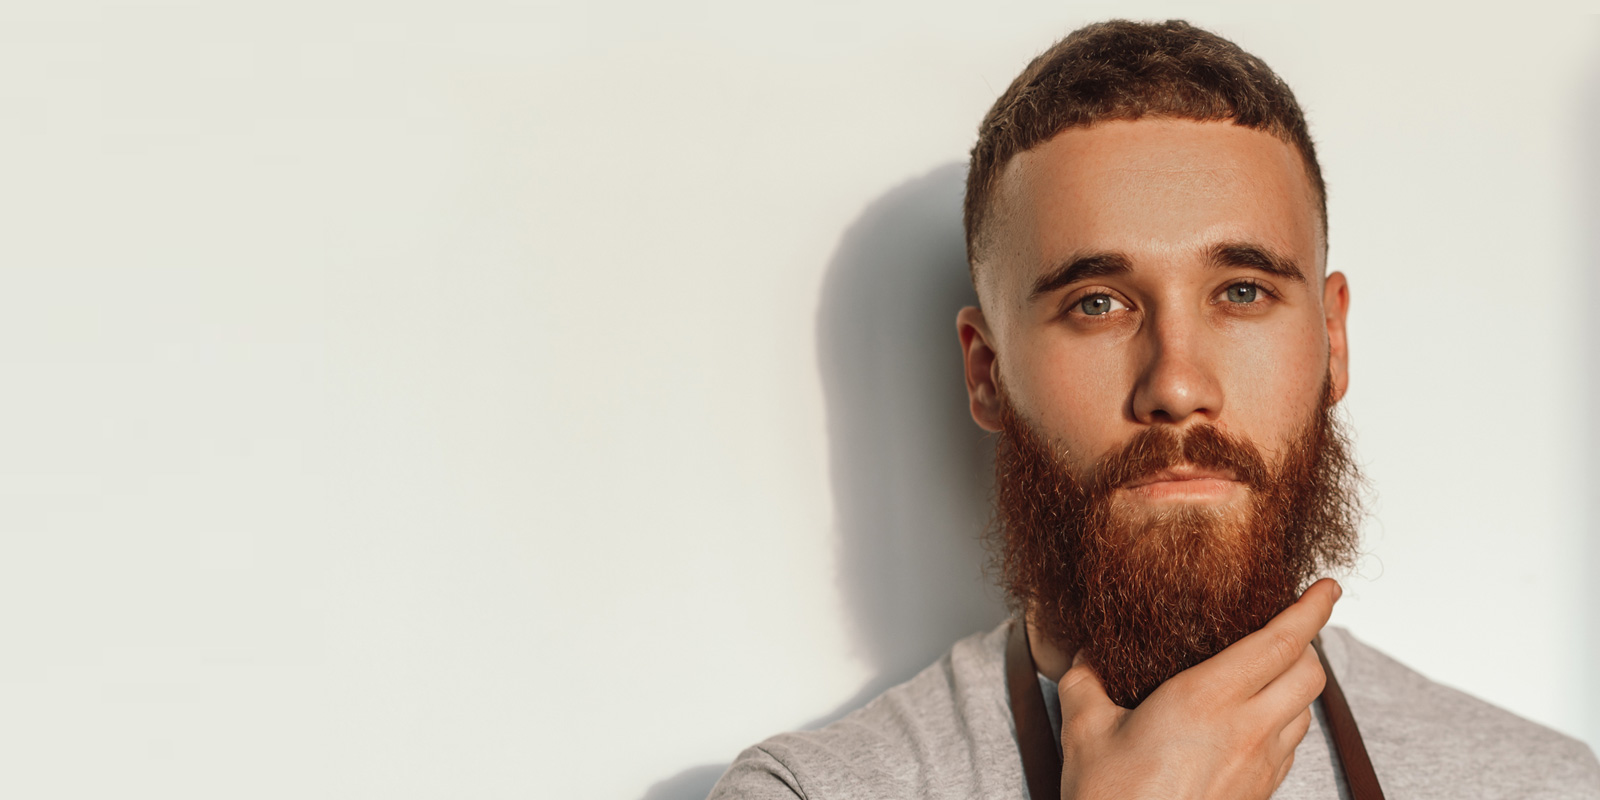 How to Grow Beard Naturally at Home: Remedies and Lifestyle Changes